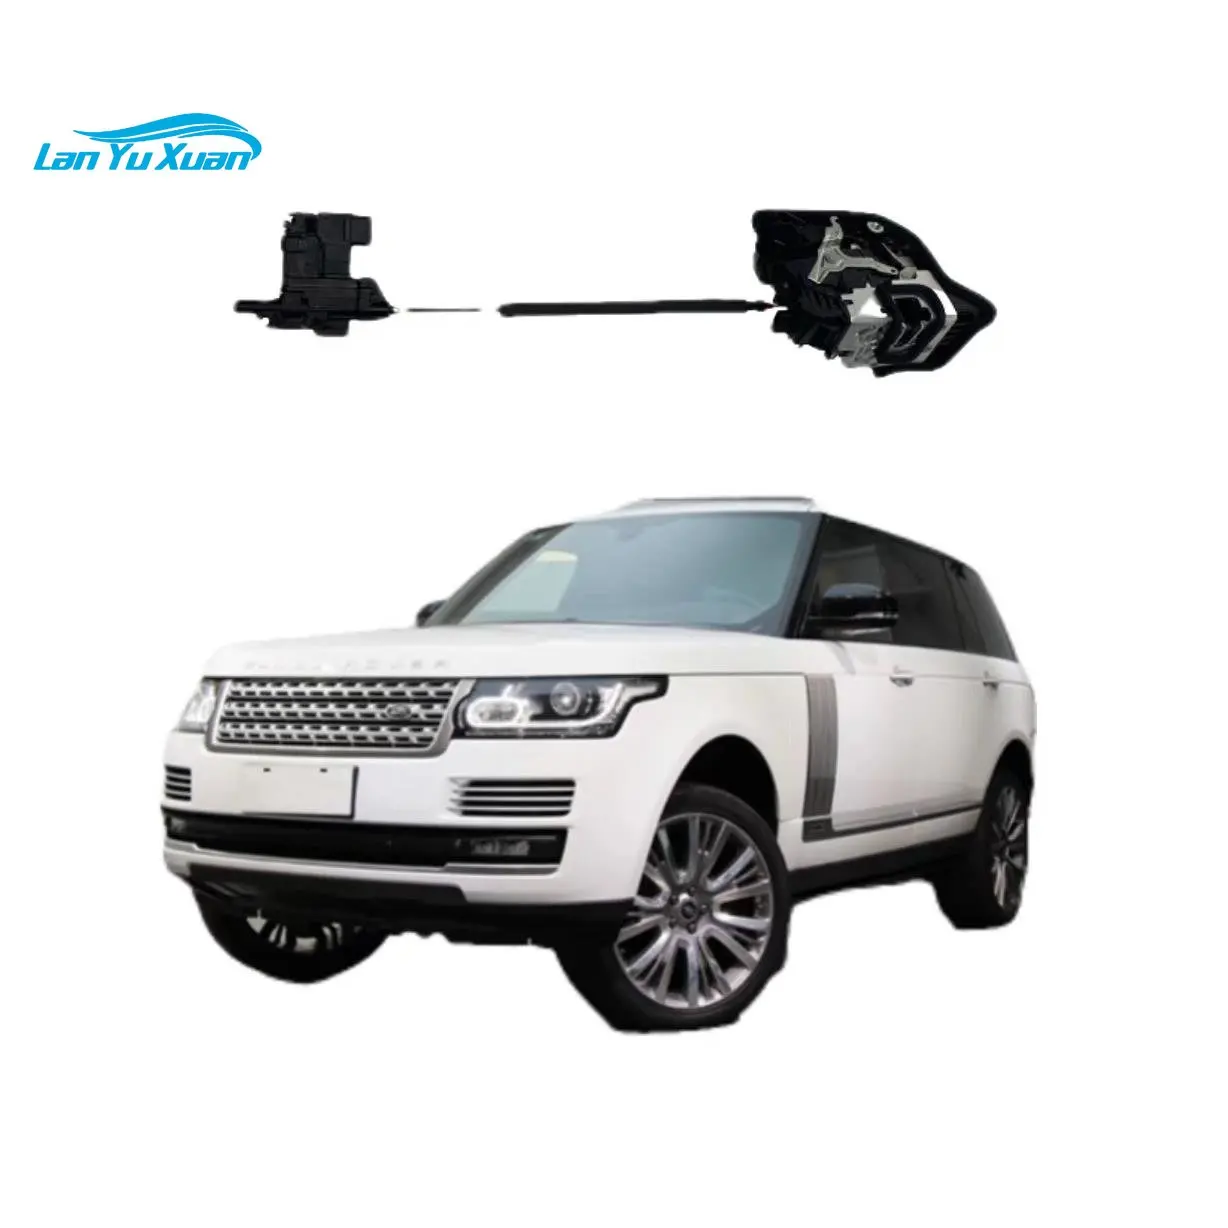 Vehicle Door Soft Power Lock System Power Liftgate Plug And Play Suction Electric For Land Rover anpviz 8ch 4k 8mp poe ip security system plug